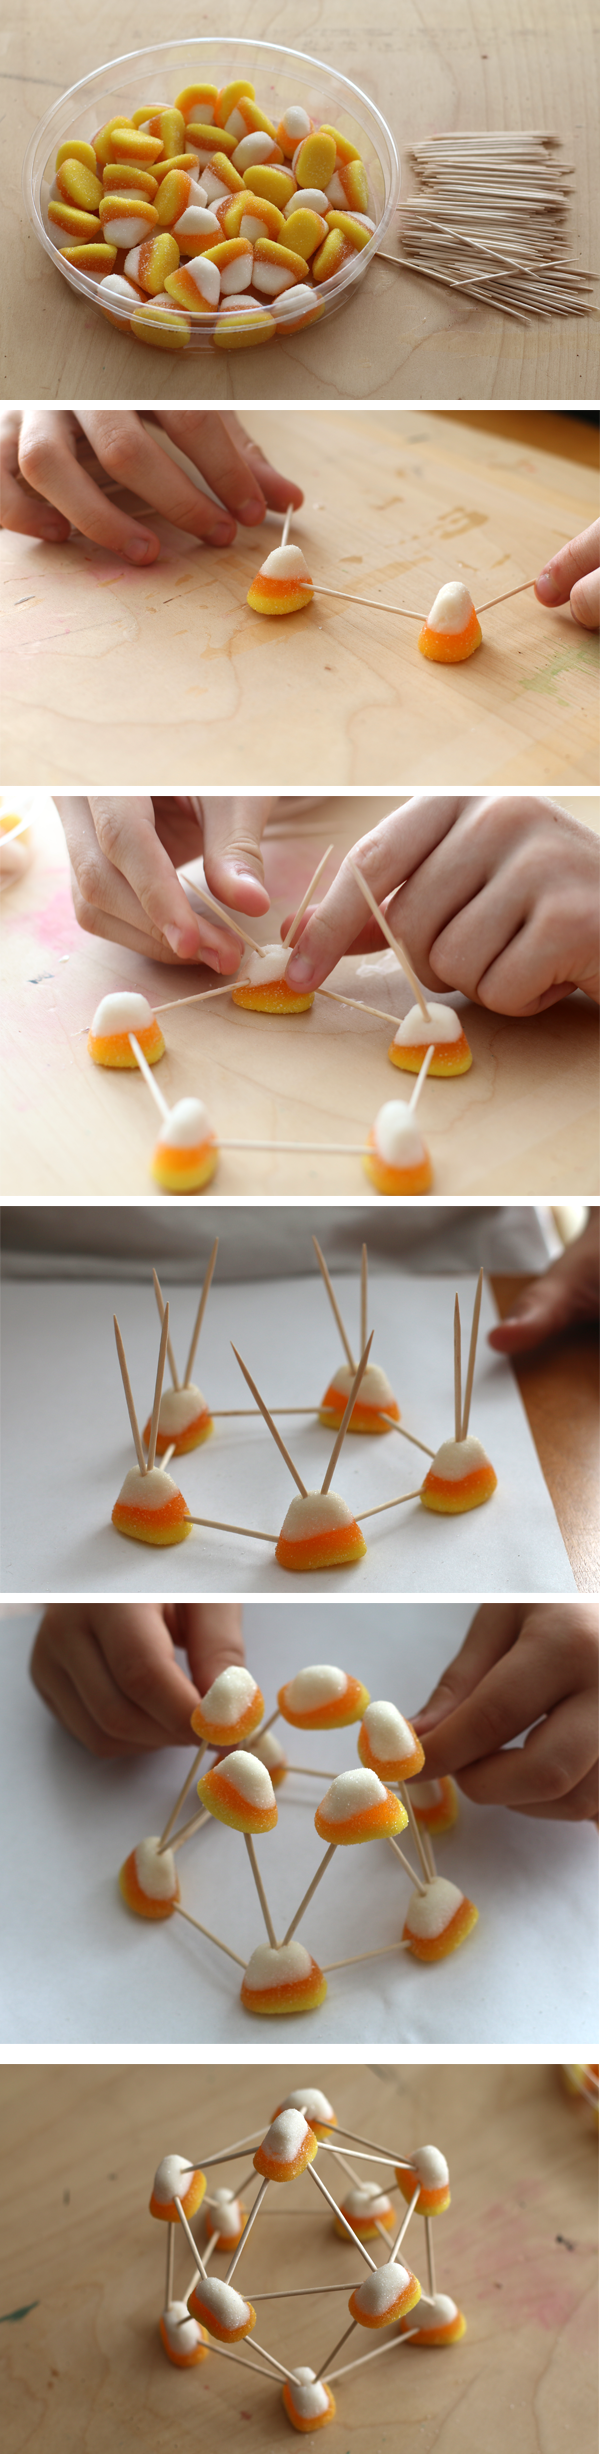 Six photos show a geodesic dome created with candy corn and toothpicks